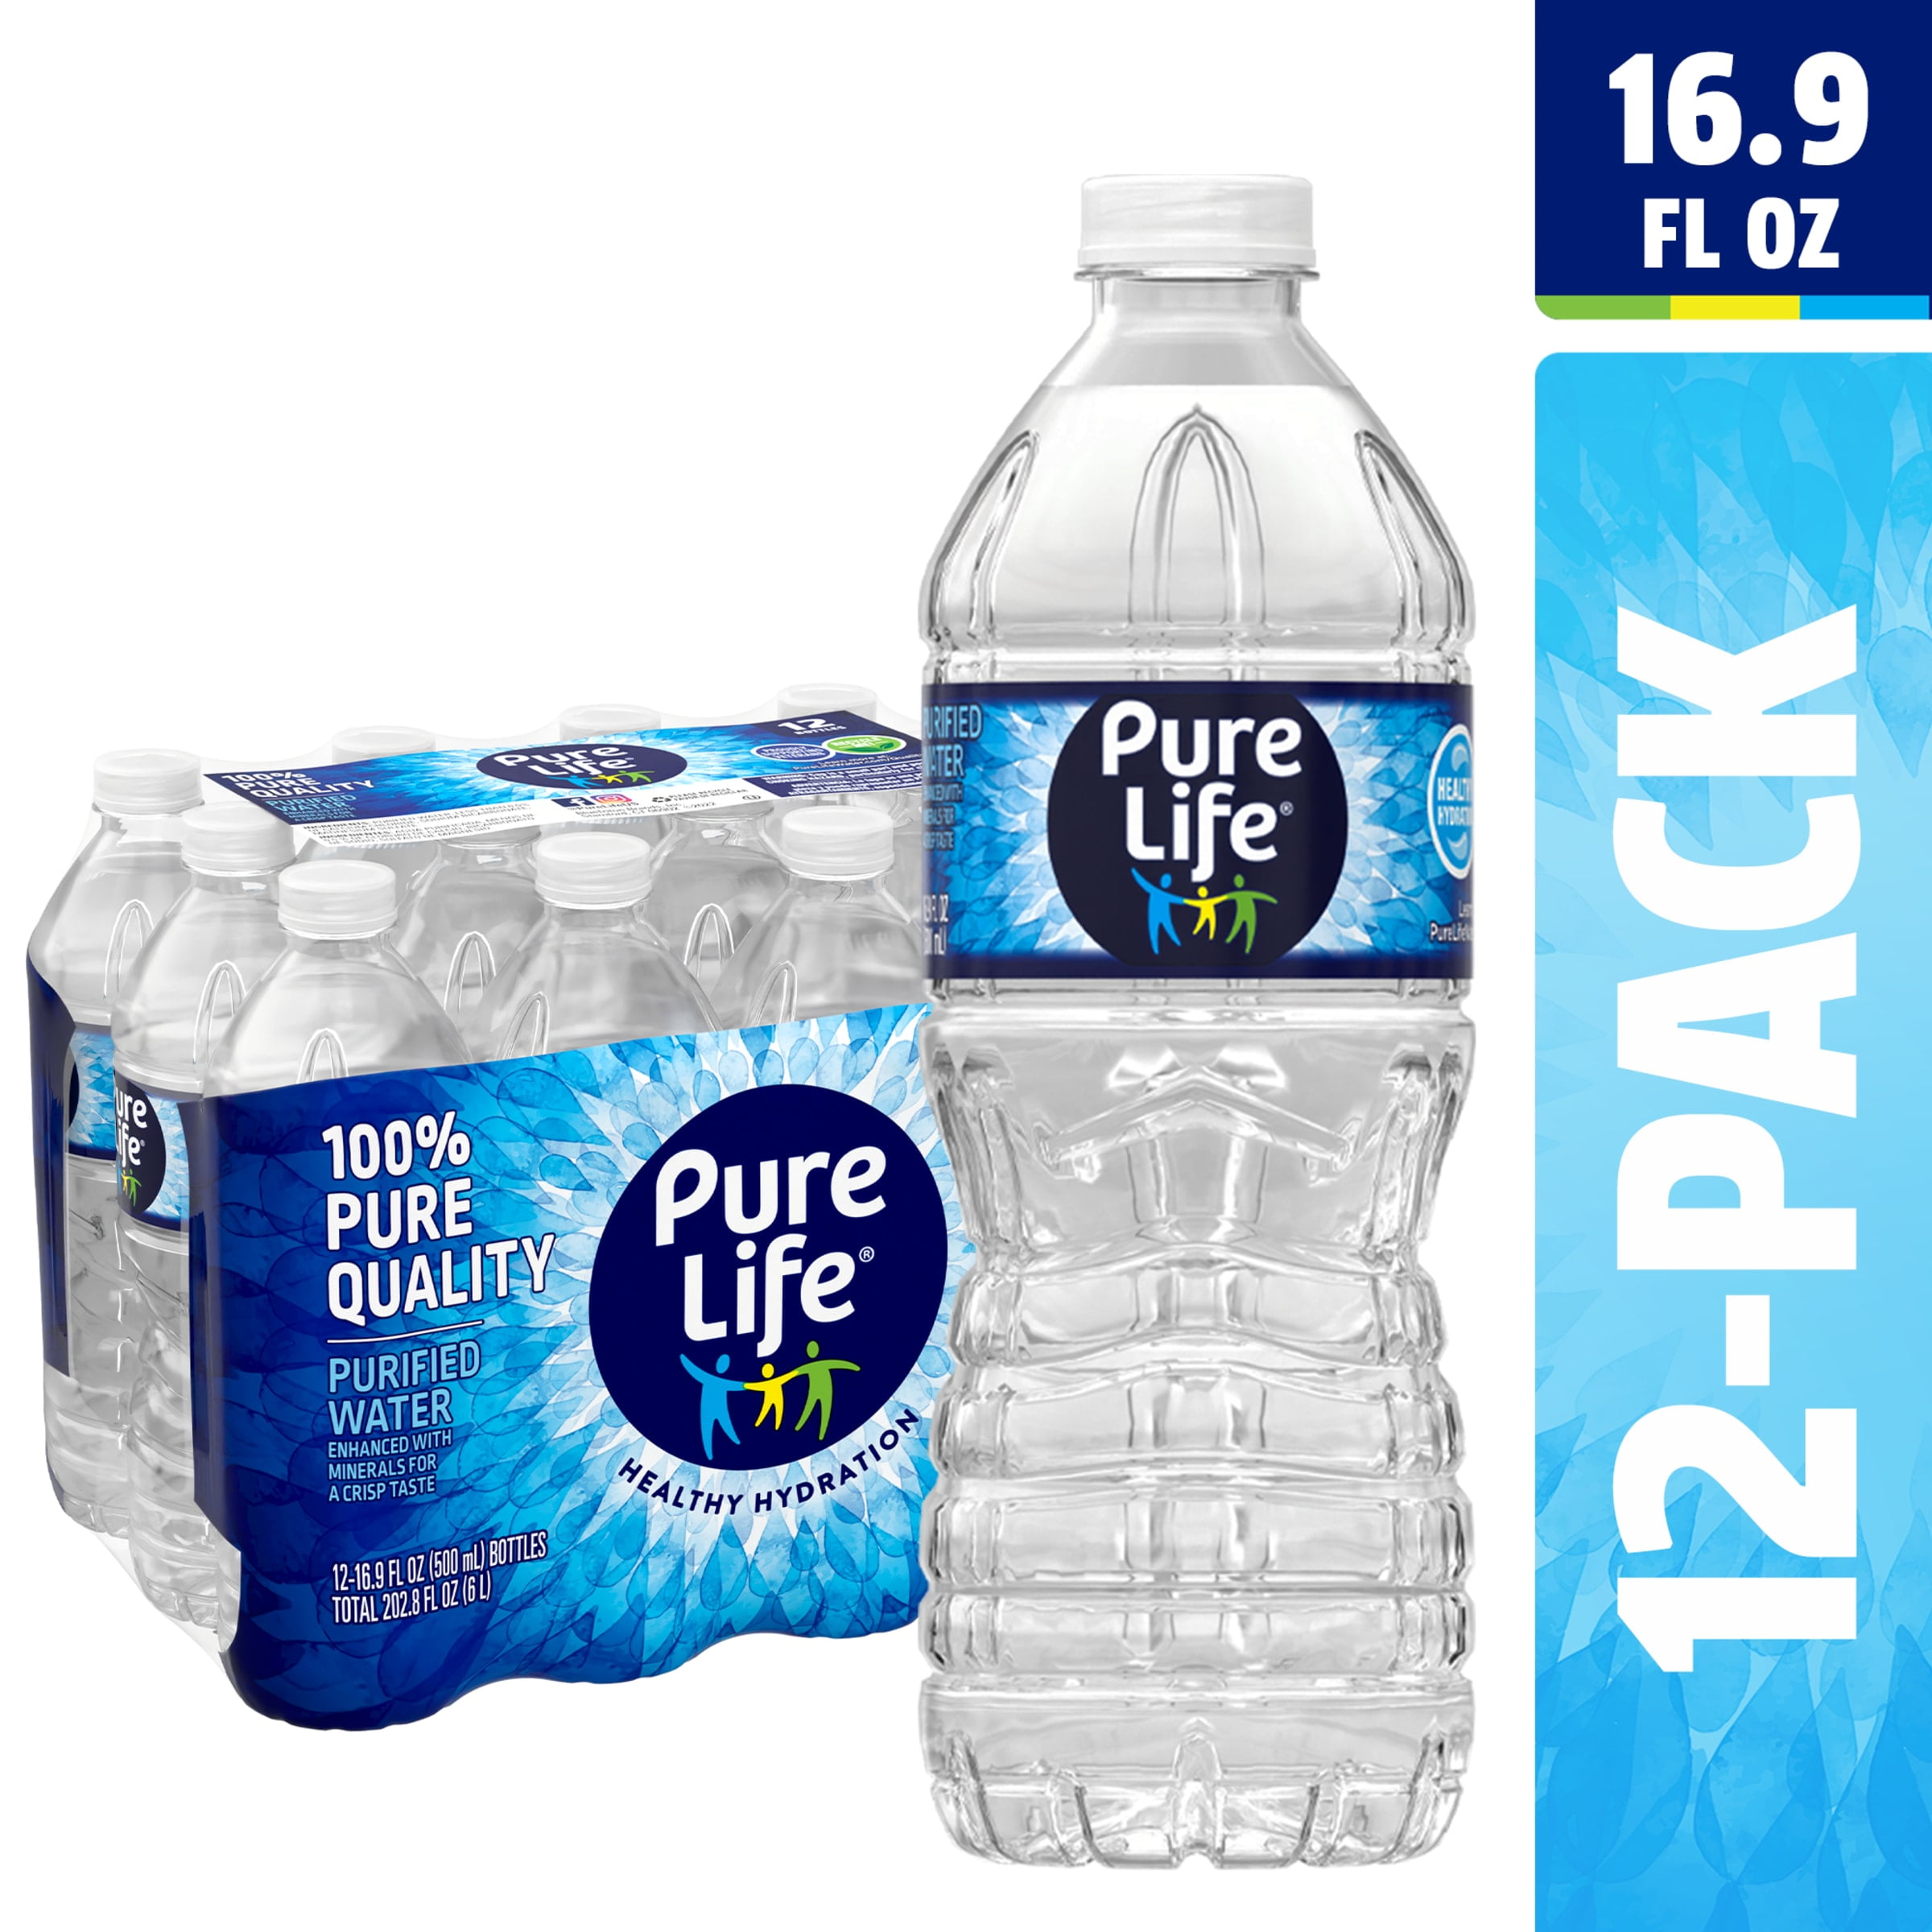 Office Bottled Water Delivery Service - Arizona Premium Water